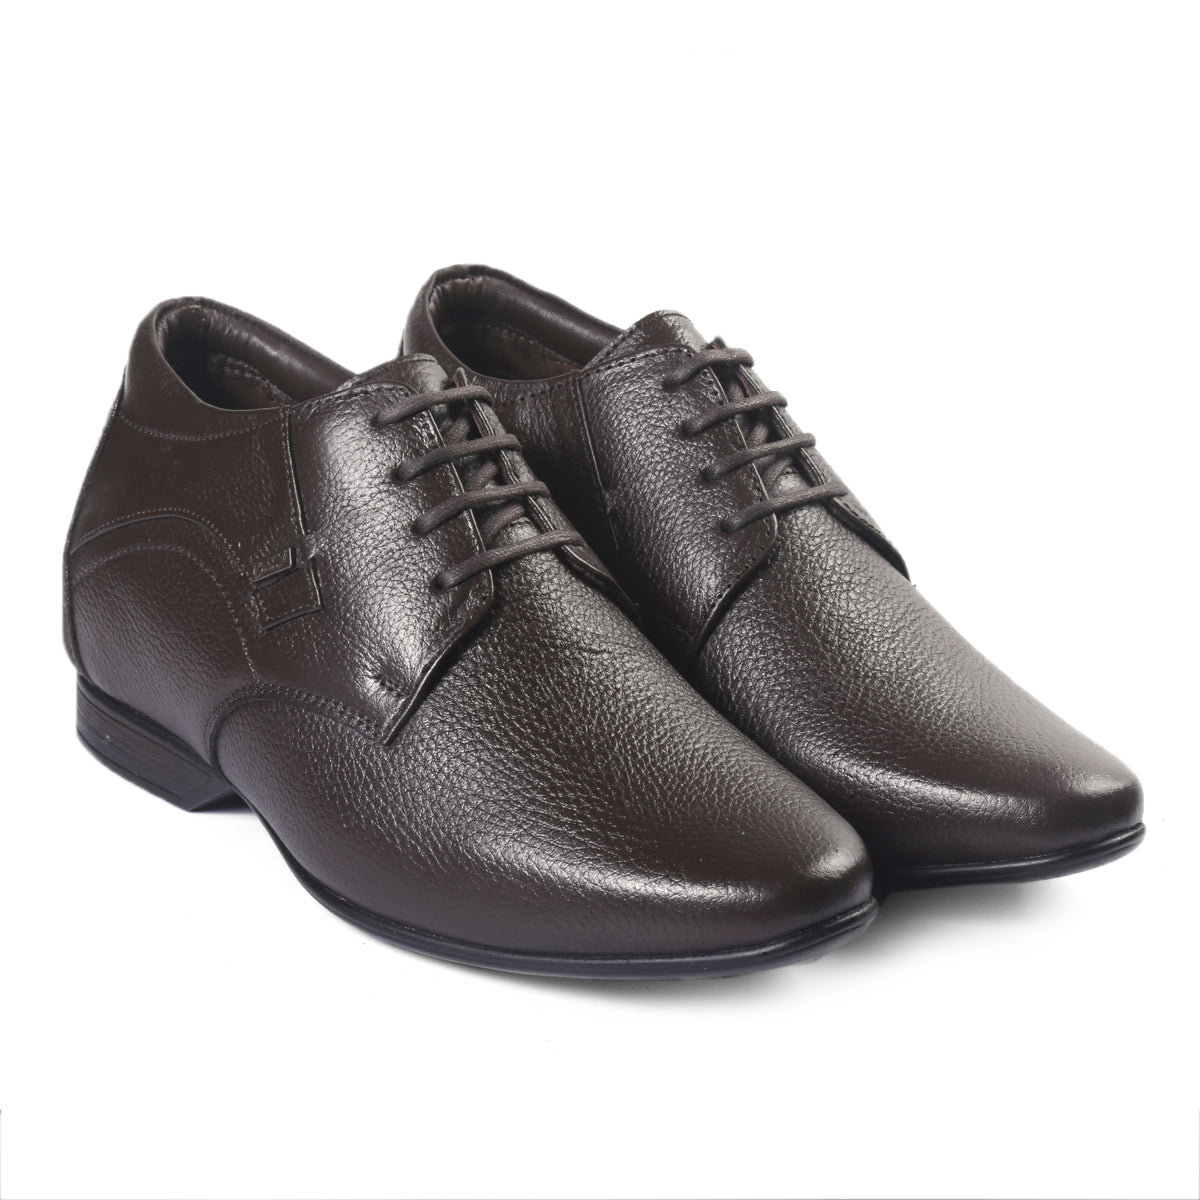 BXXY 3 Inch Height Increasing Formal Faux Leather Derby Shoes